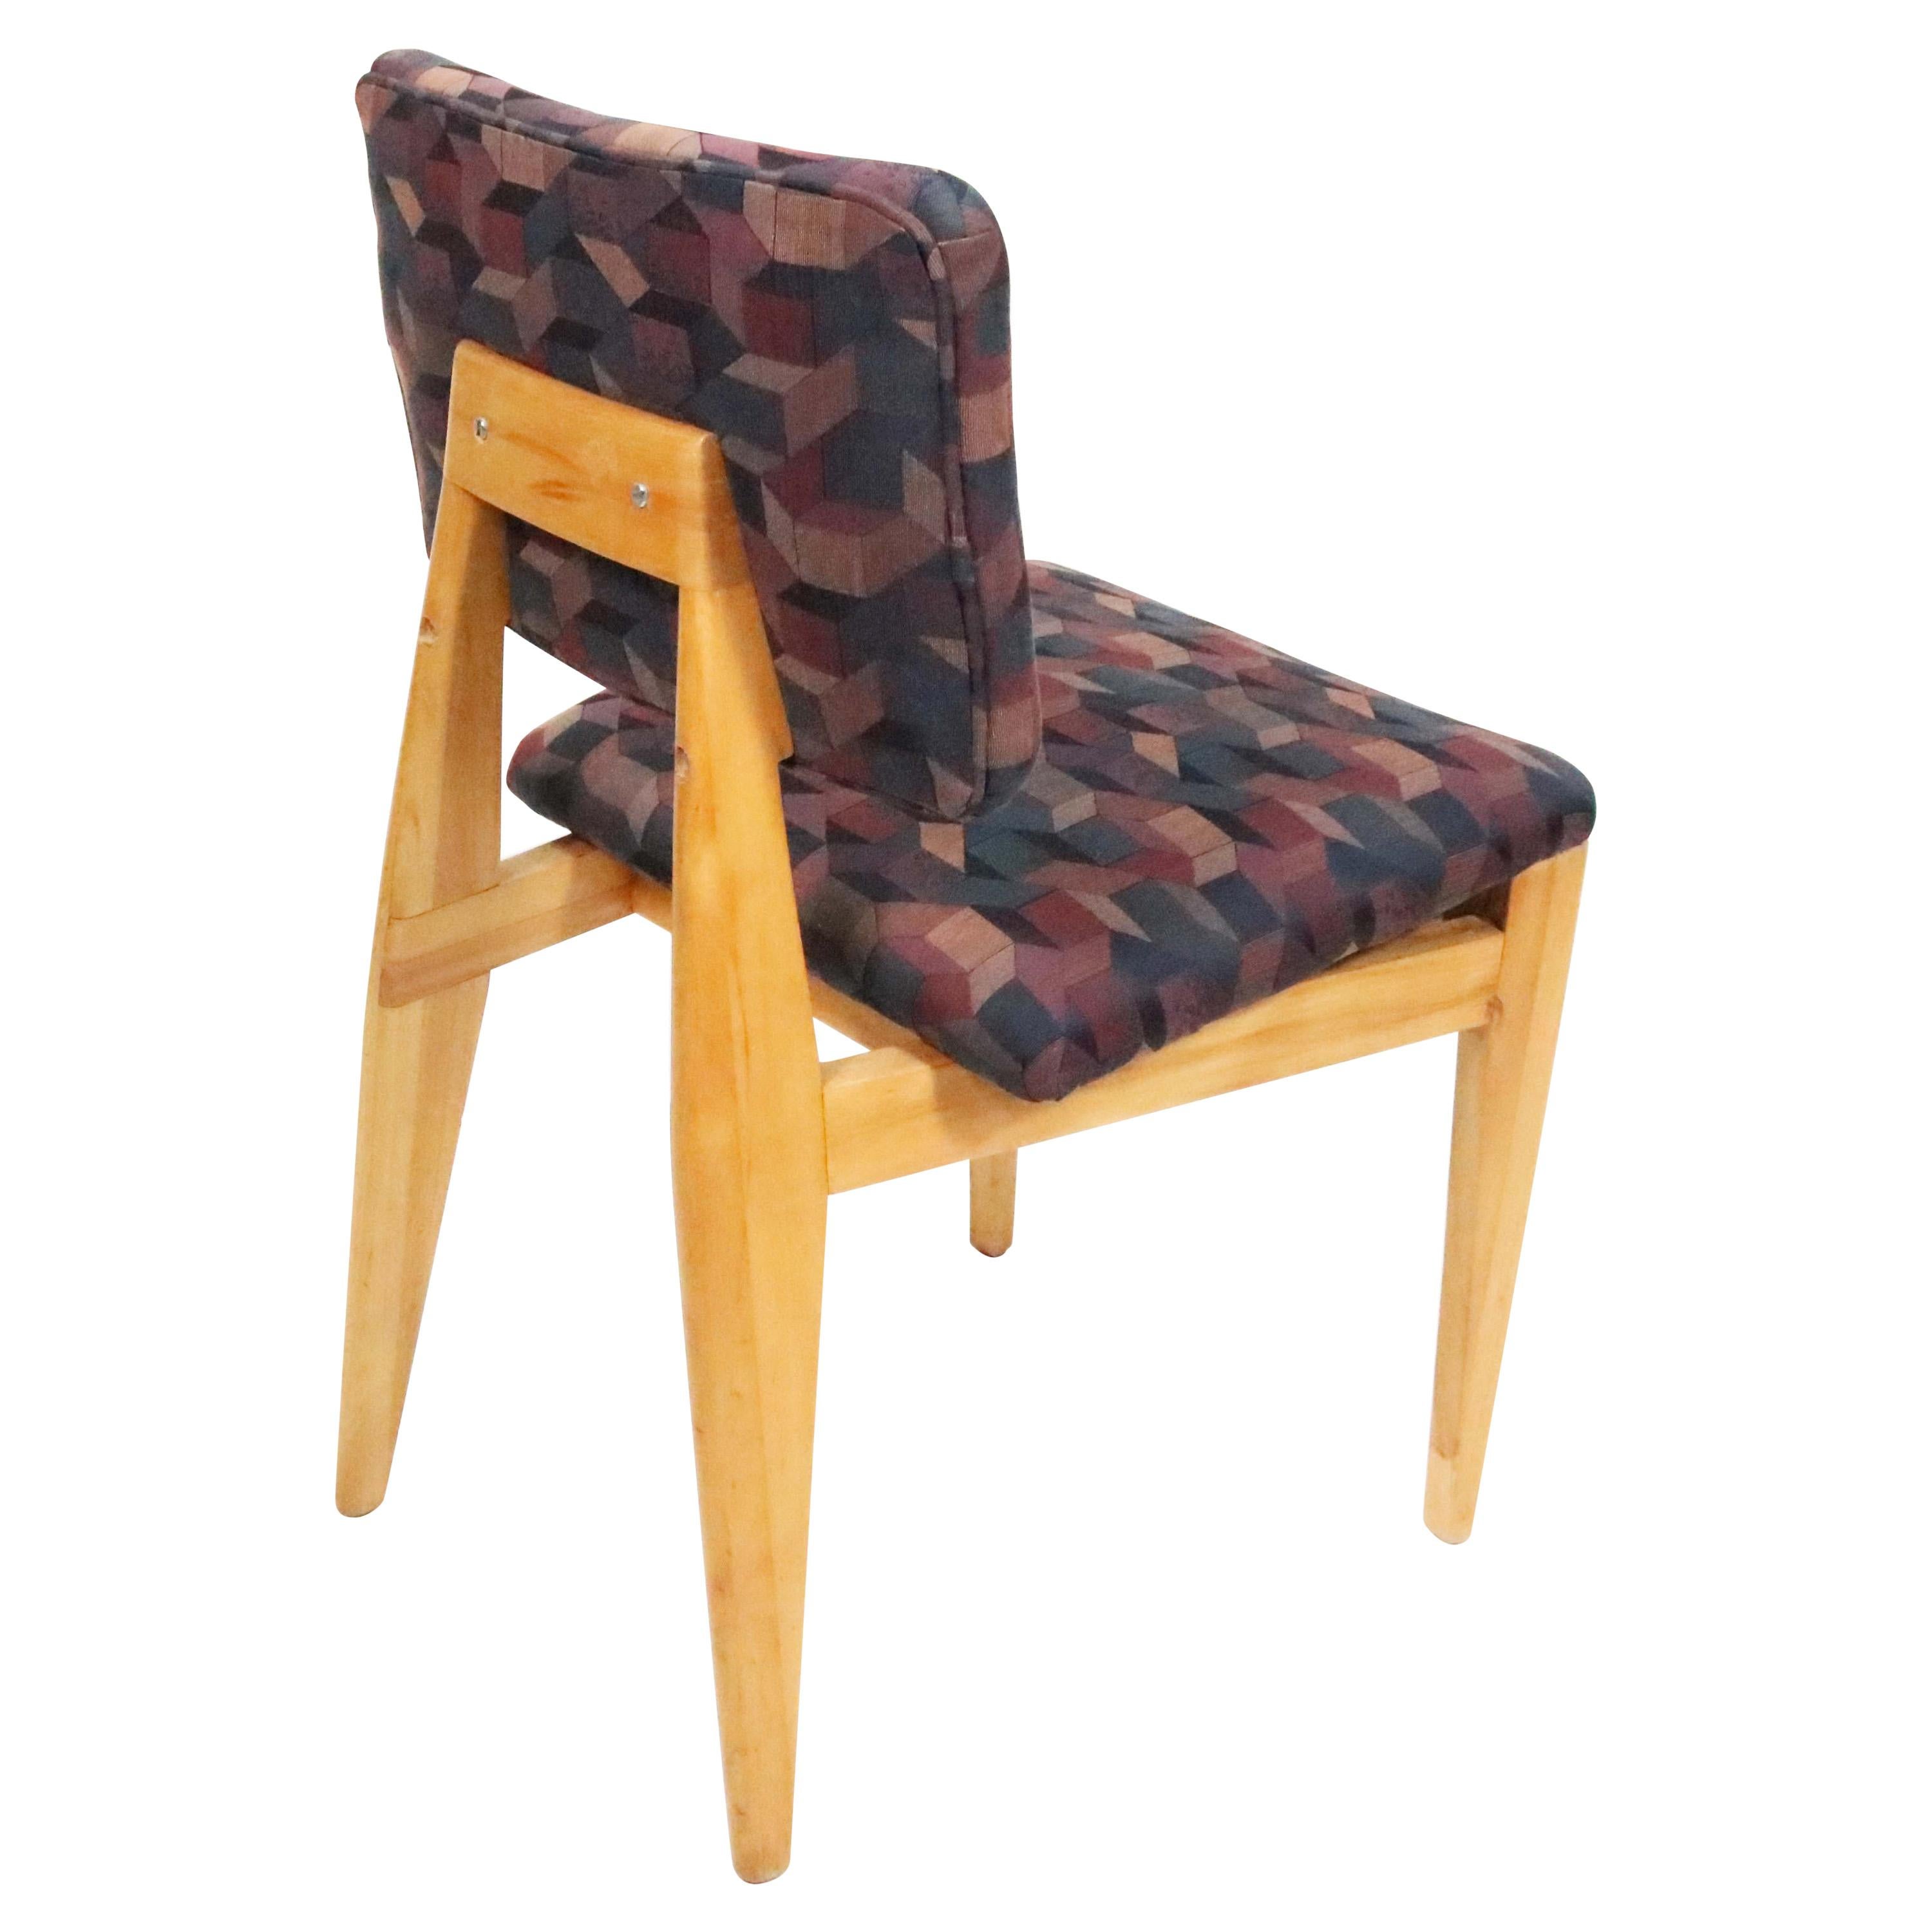 Dining or Desk Chair by Ernest Farmer for George Nelson and Associates